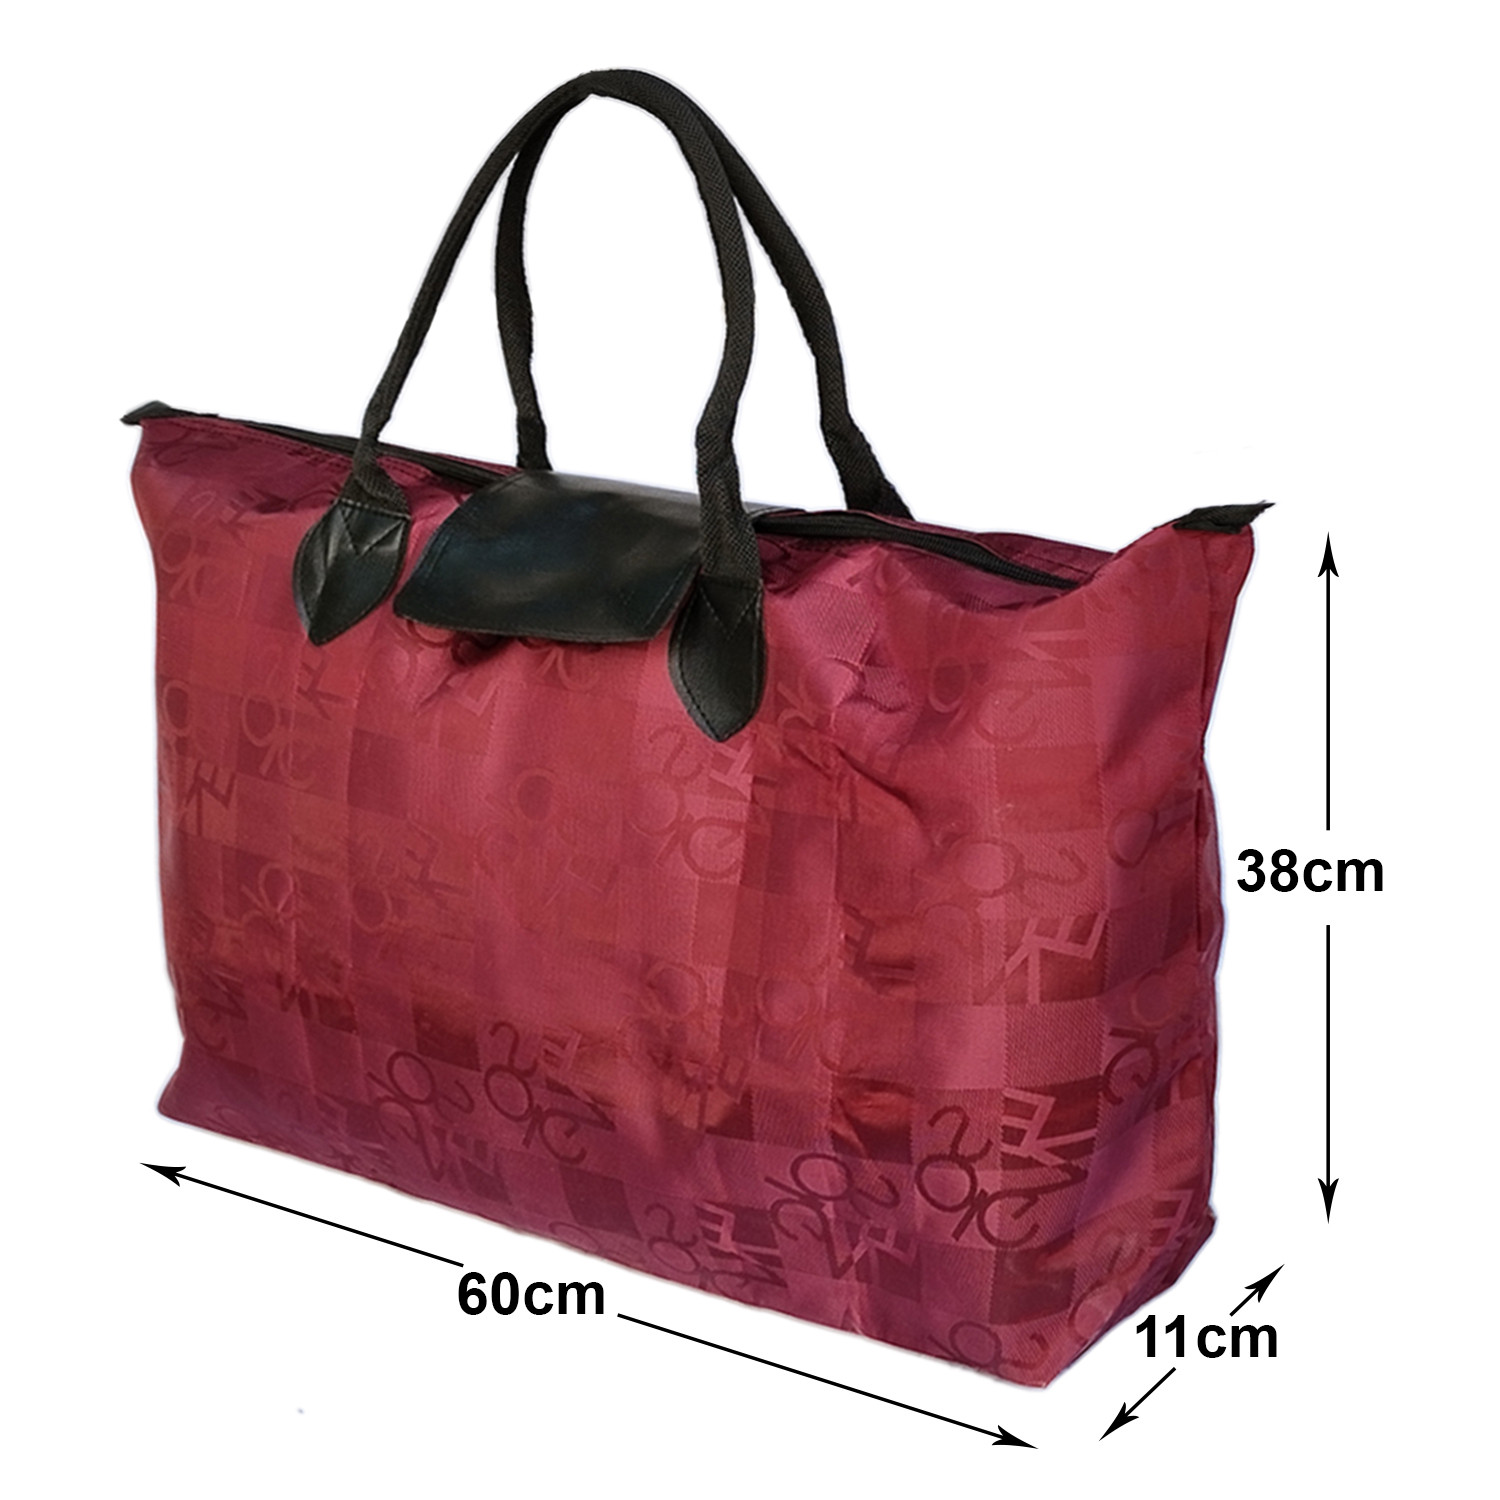 Kuber Industries Multiuses Check Print Rexine Shopping Bags/Grocery Bag for Carry Grocery, Fruits, Vegetable with Handles (Maroon)